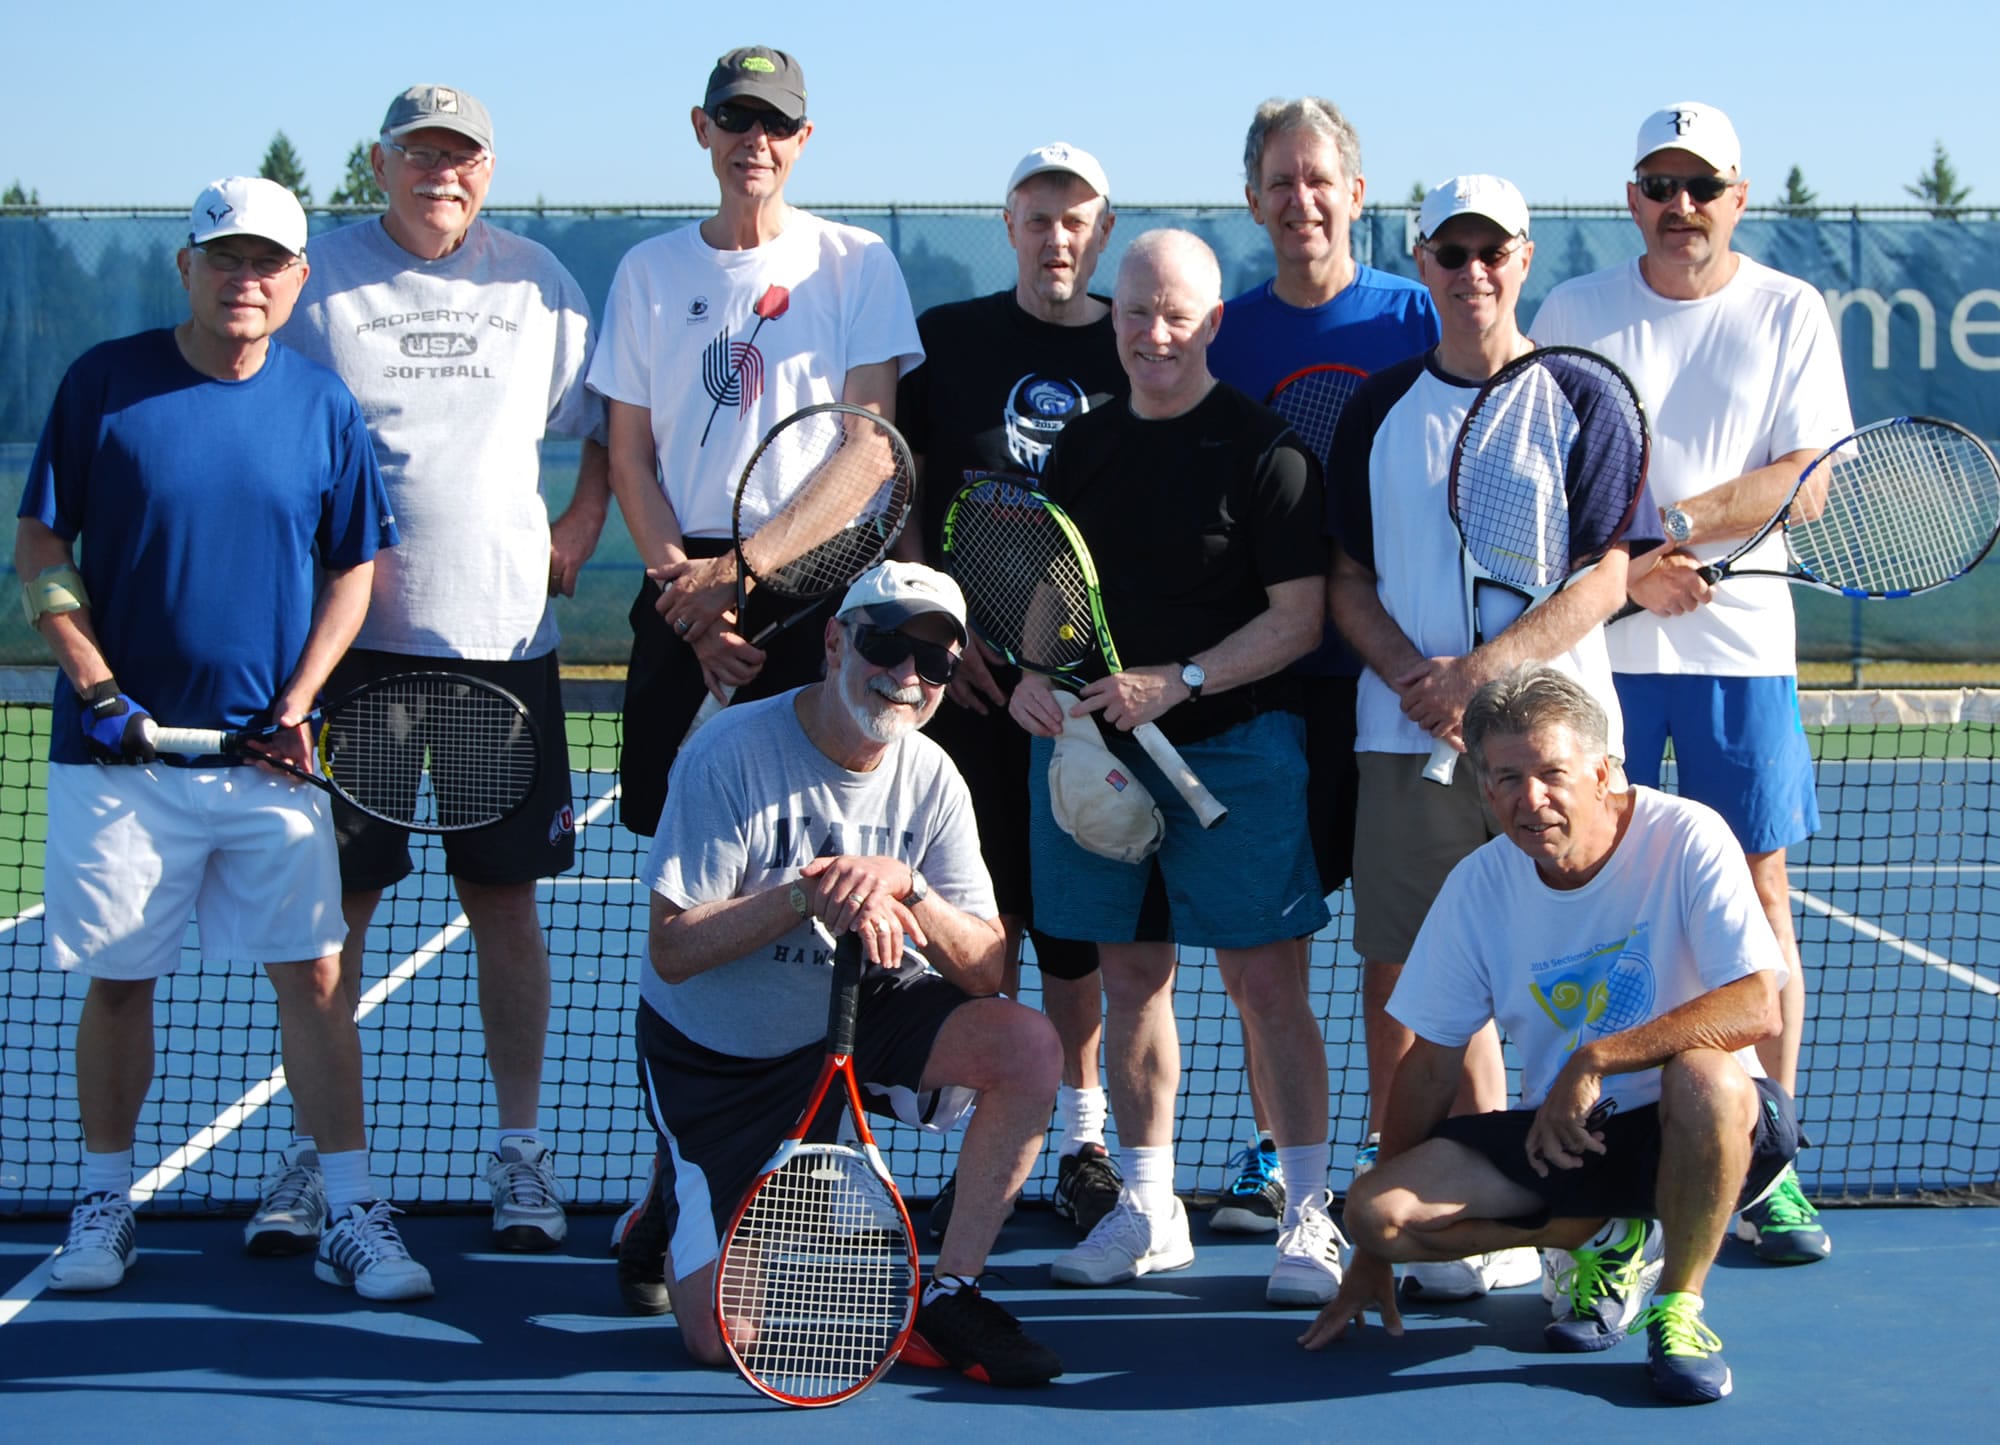 Club Green Meadows 65 & over USTA tennis team that qualified for the 2017 Pacific Northwest Sectionals.